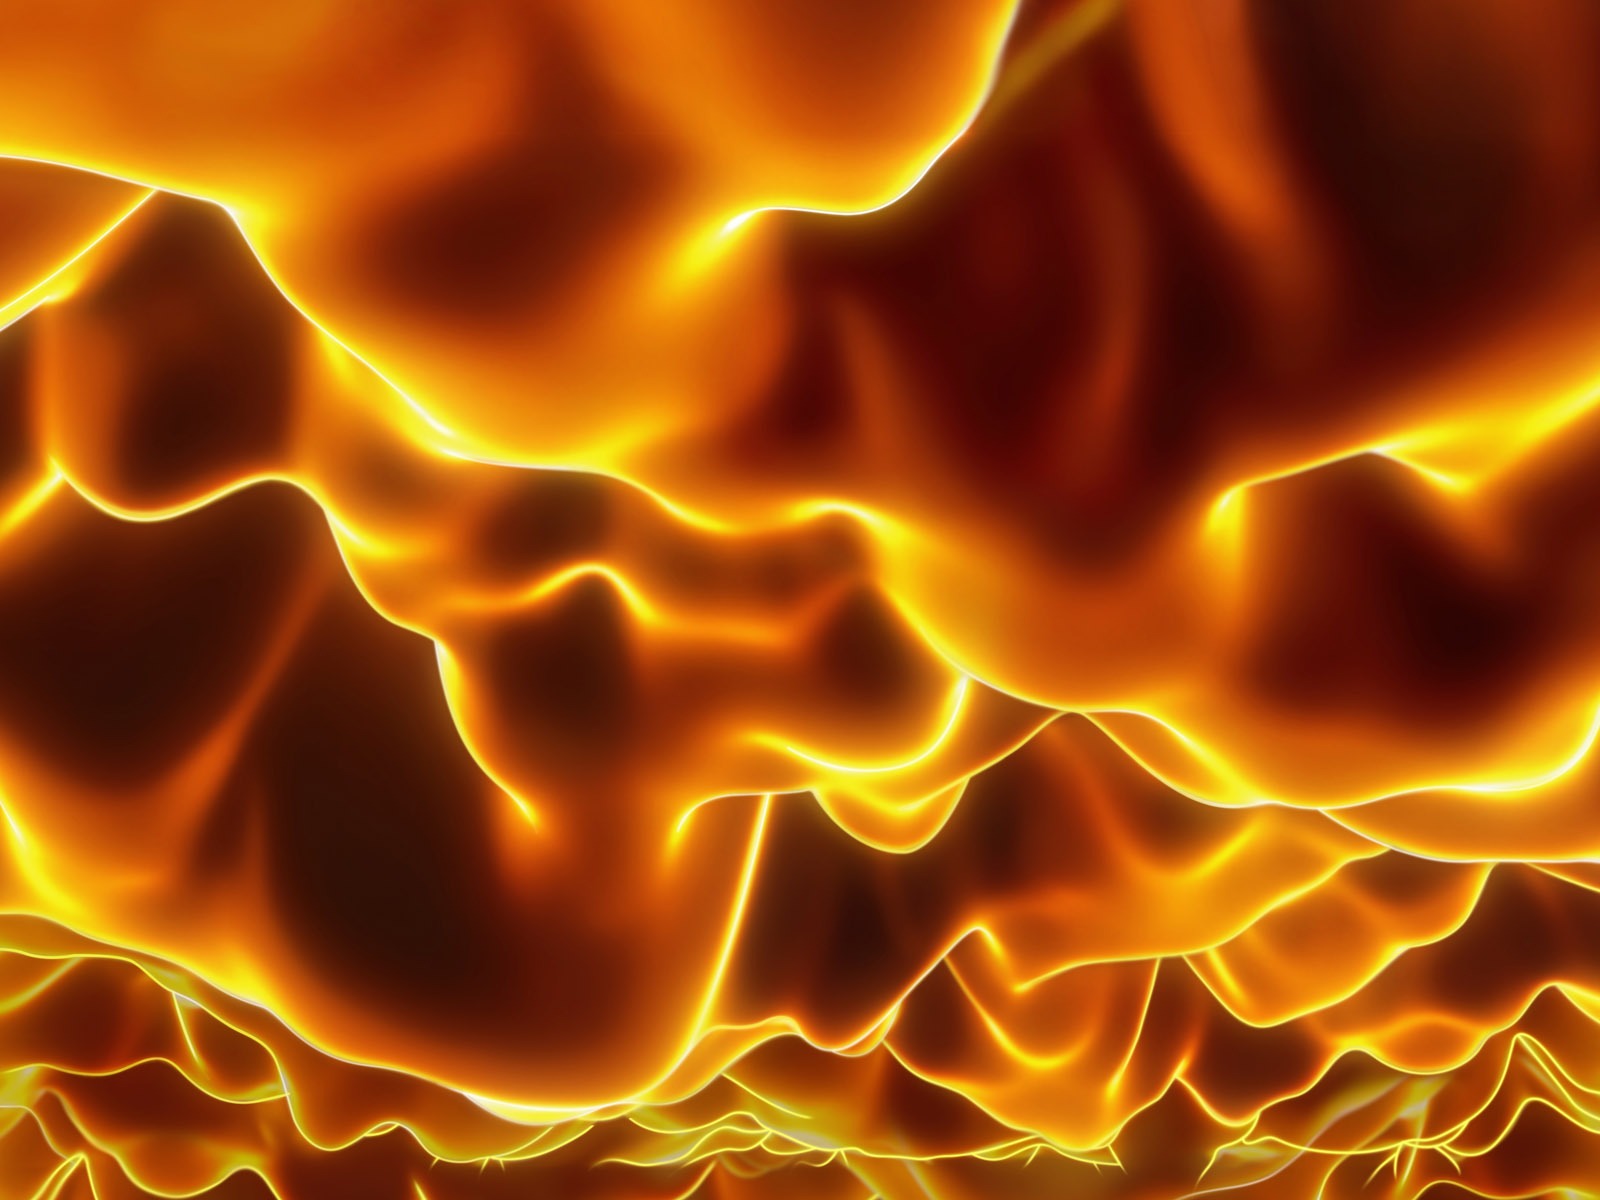 Flame Feature HD Wallpaper #4 - 1600x1200